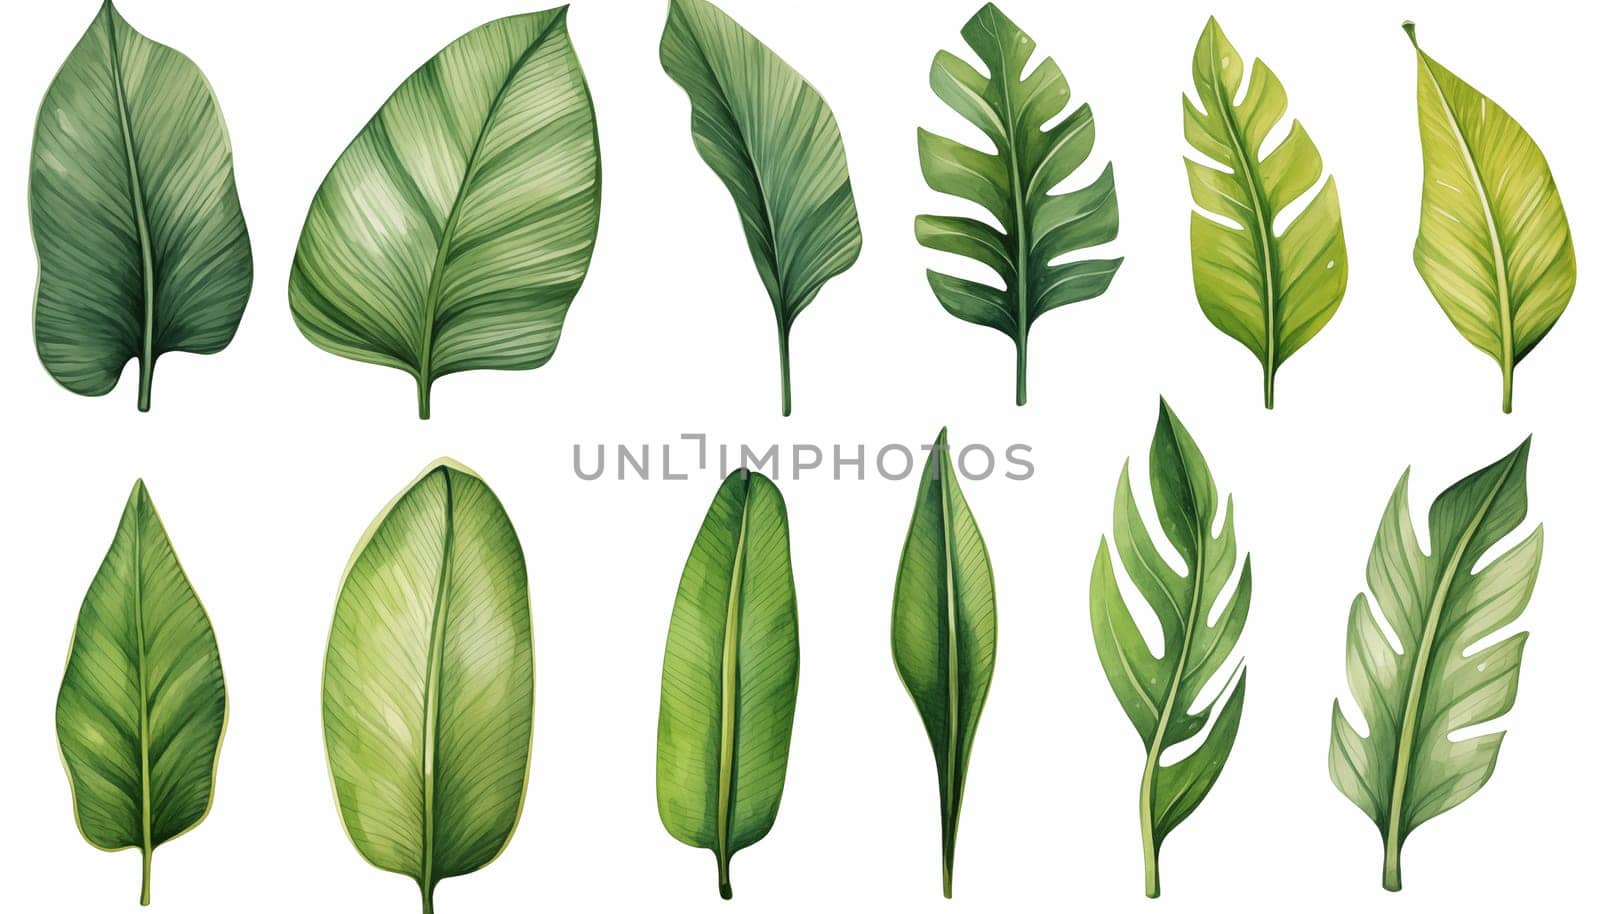 Watercolor drawing set of tropical leaves banana by Nadtochiy